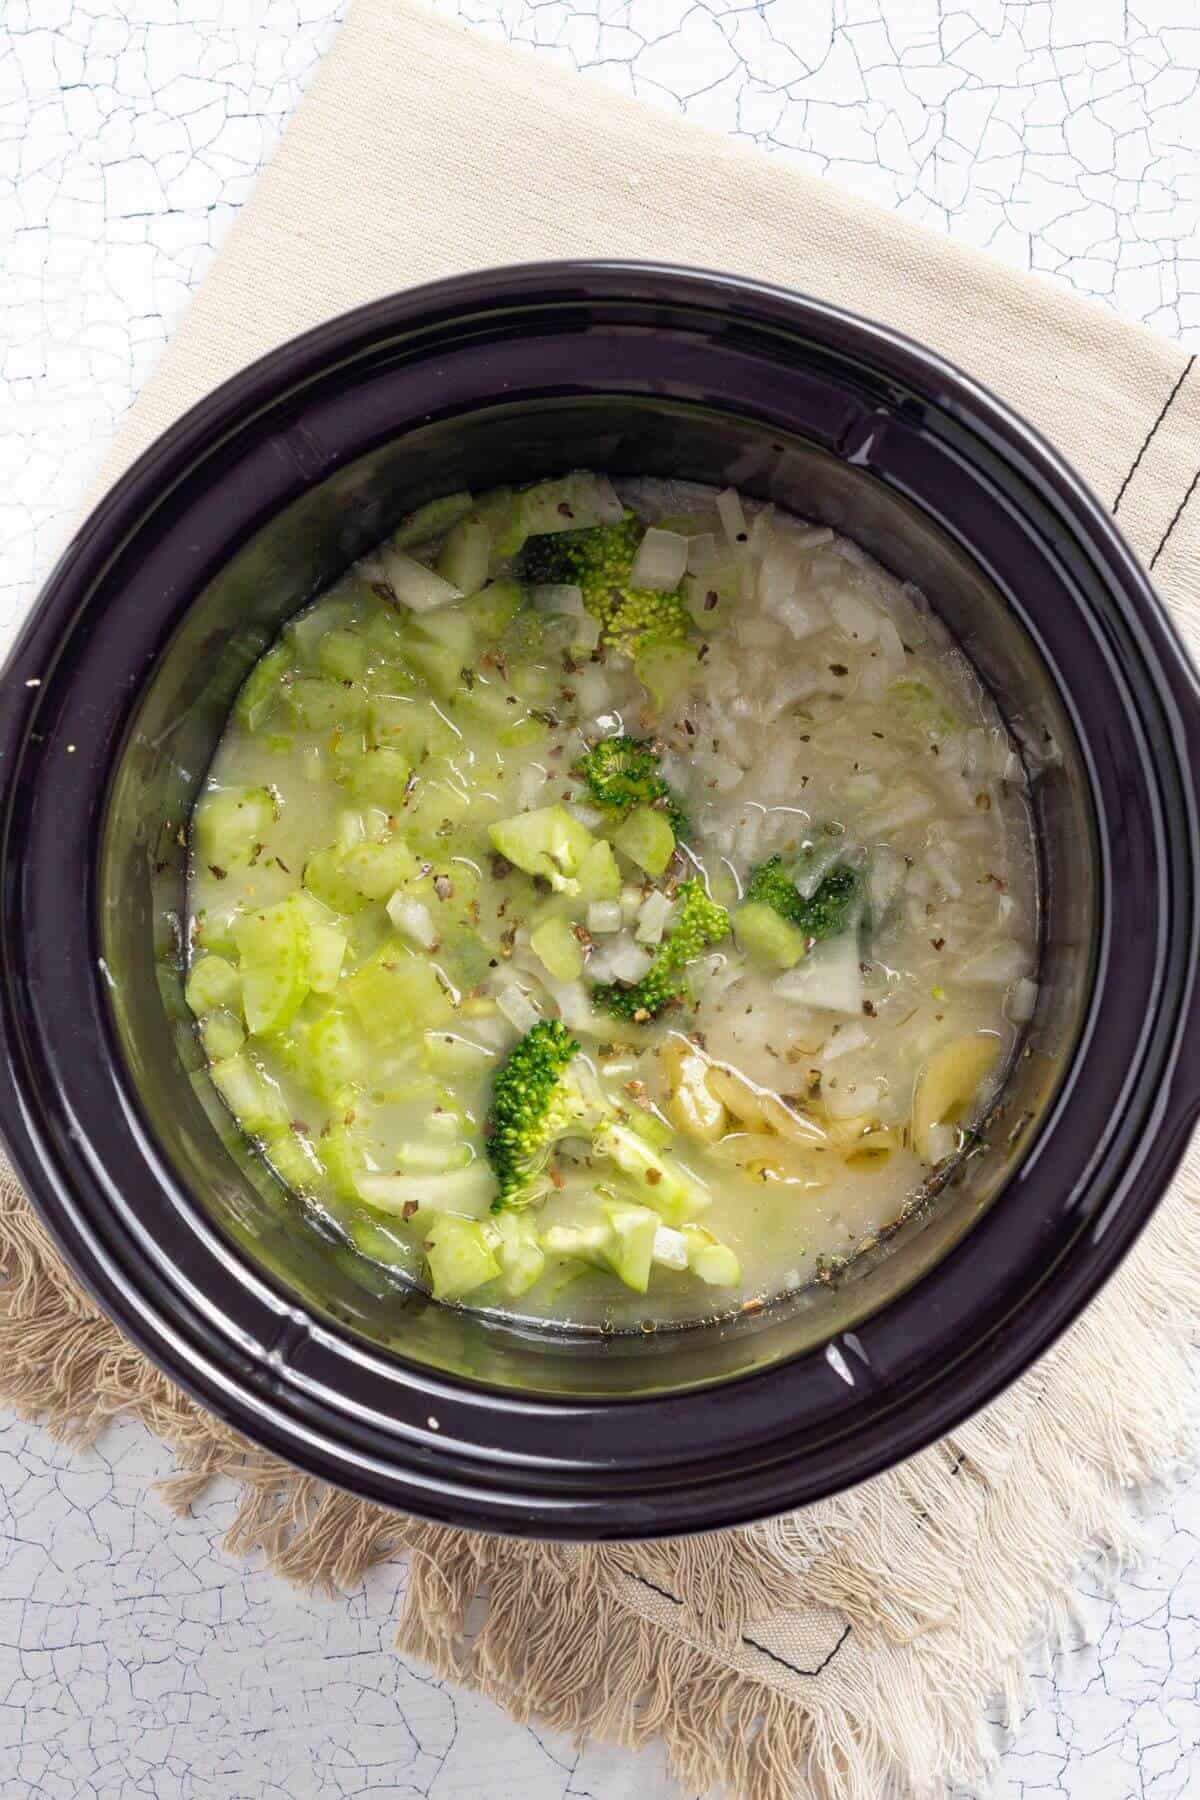 A crock pot of soup with broccoli and broccoli in it.